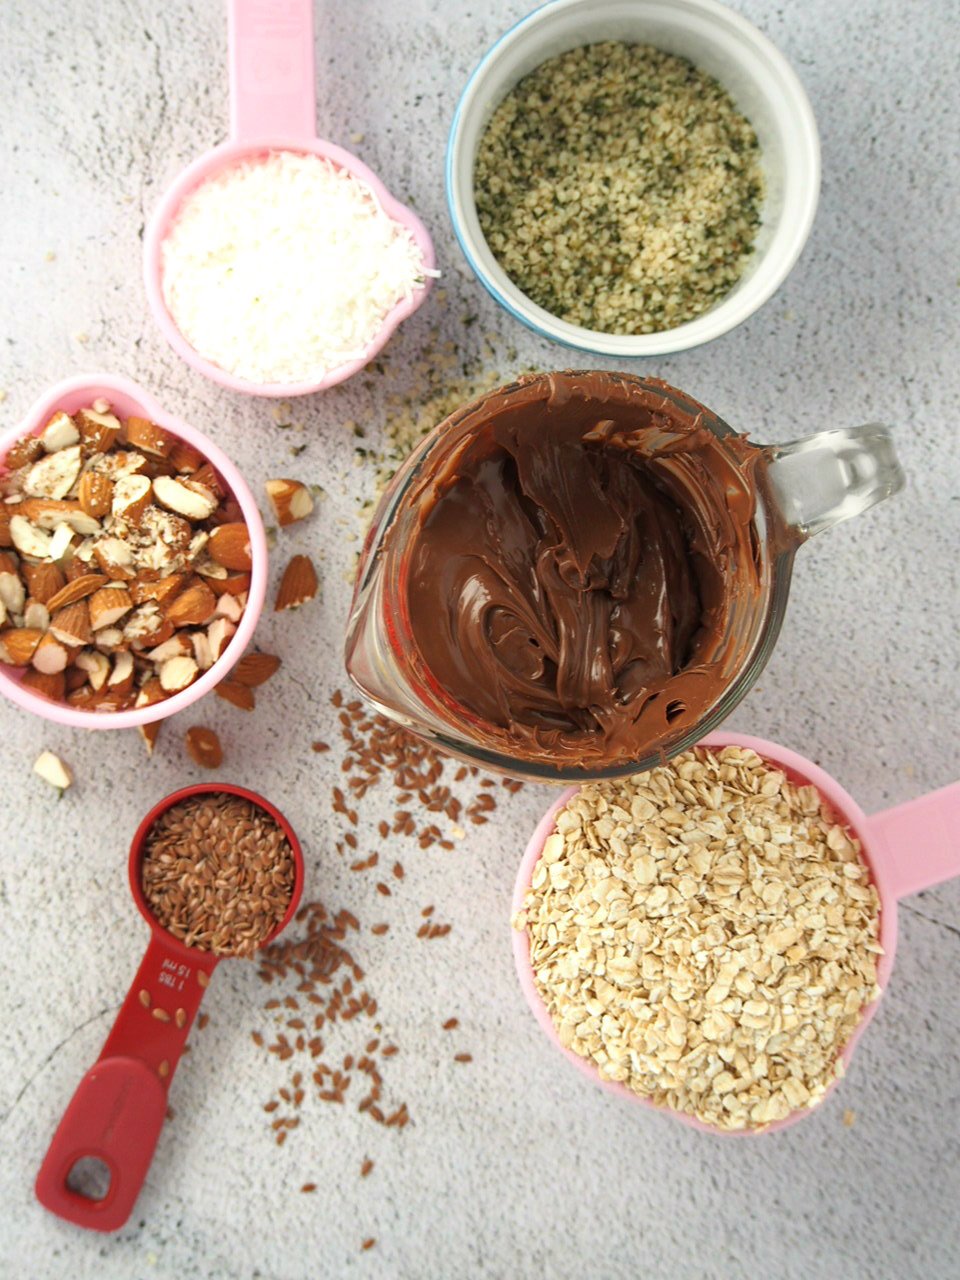 The ingredients for Nutella Energy balls.